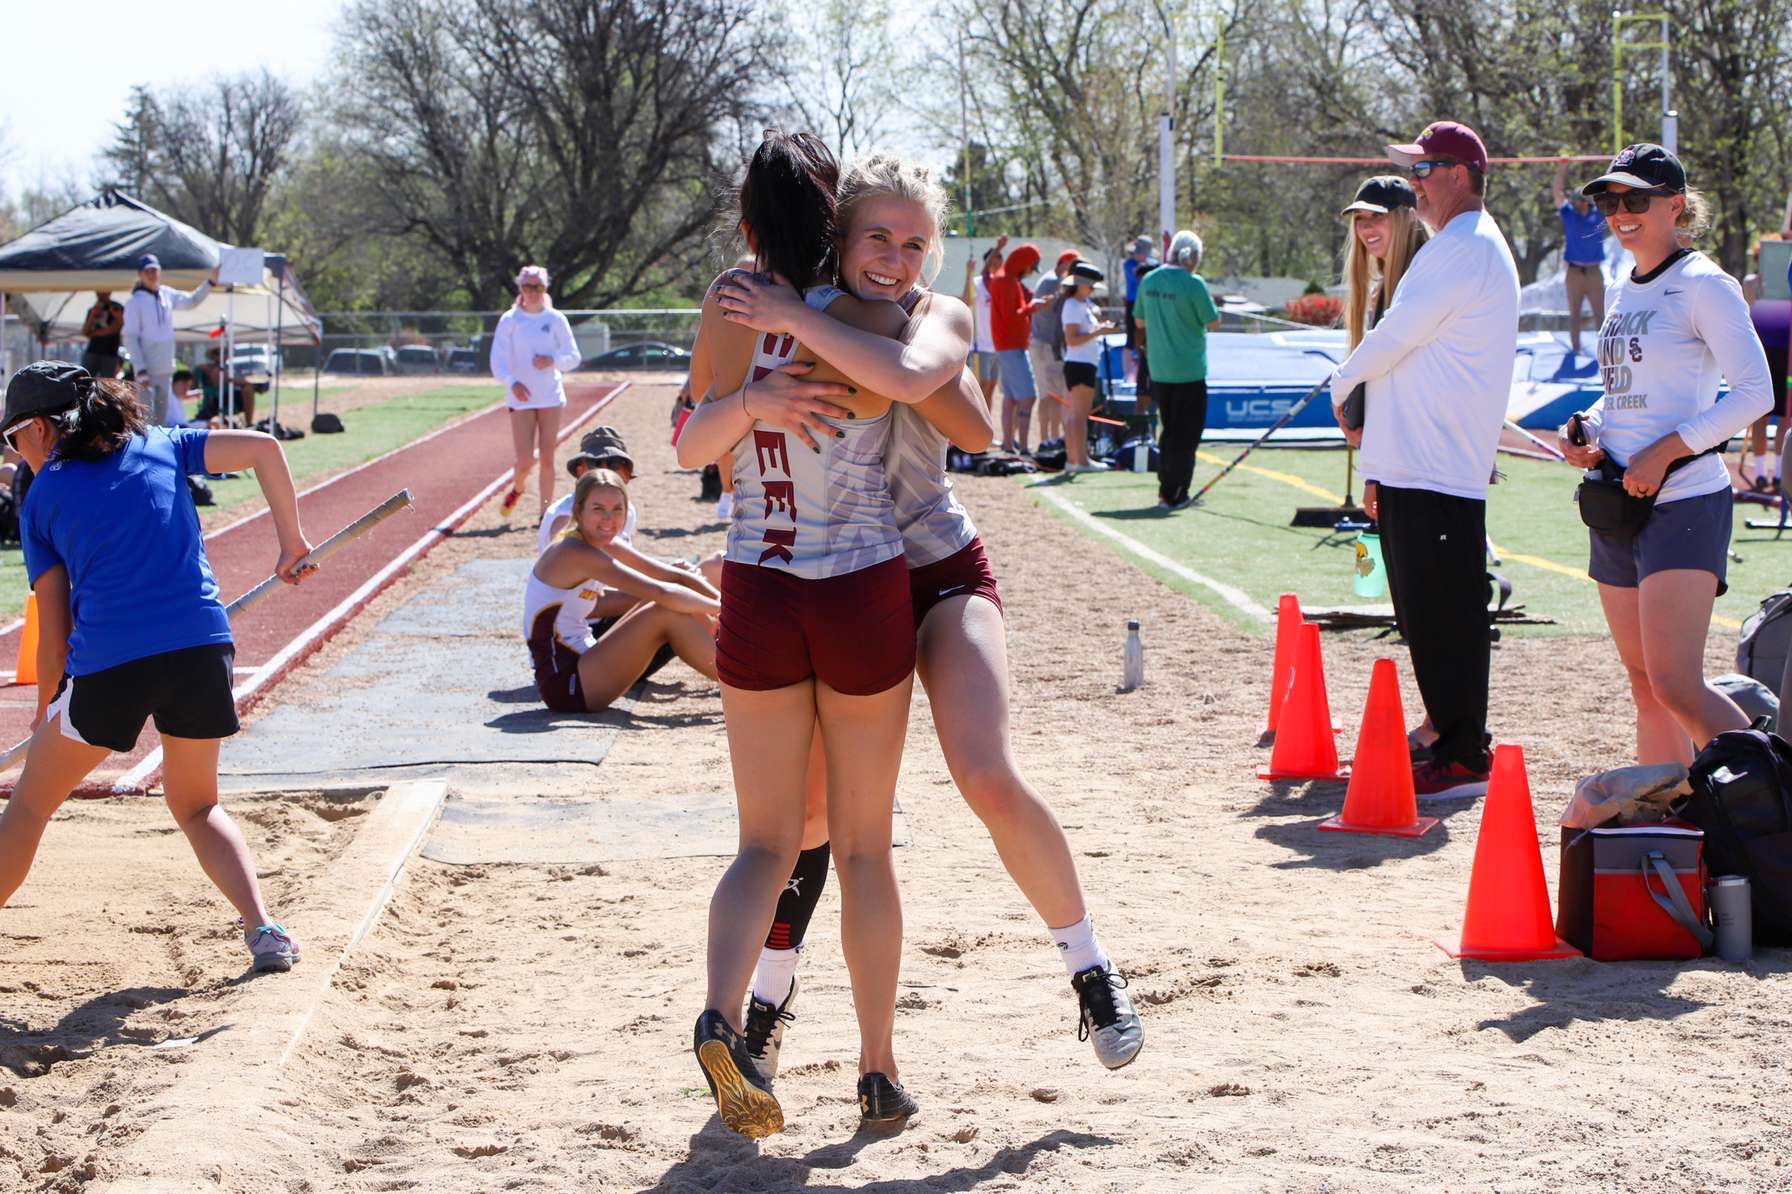 Katie Bogdanova embraces her teammate after competing in the long jump.